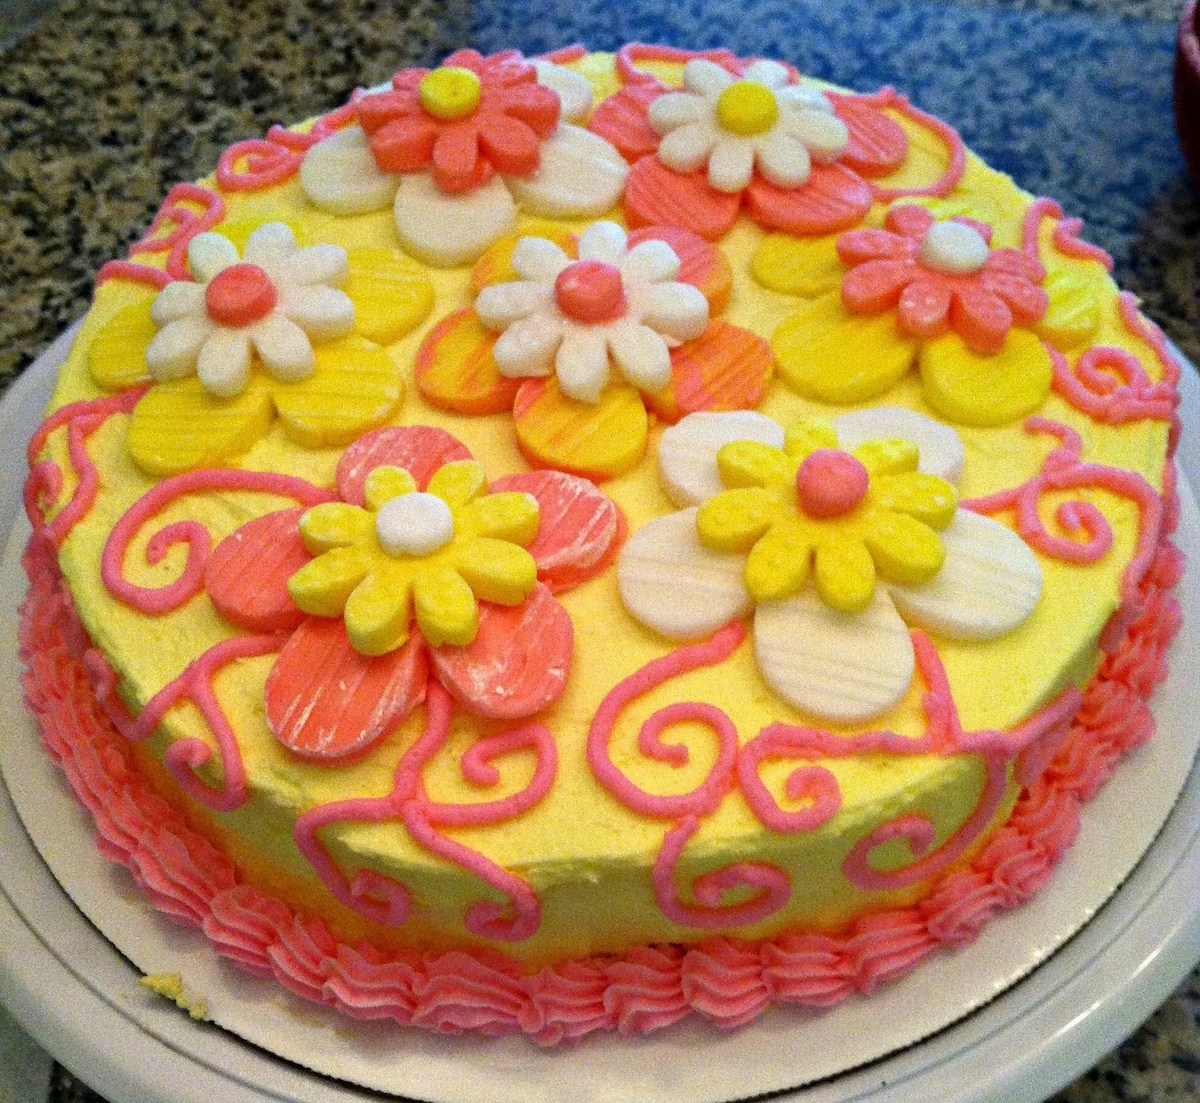 images of birthday cakes,pictures of birthday cakes,
pics of cakes